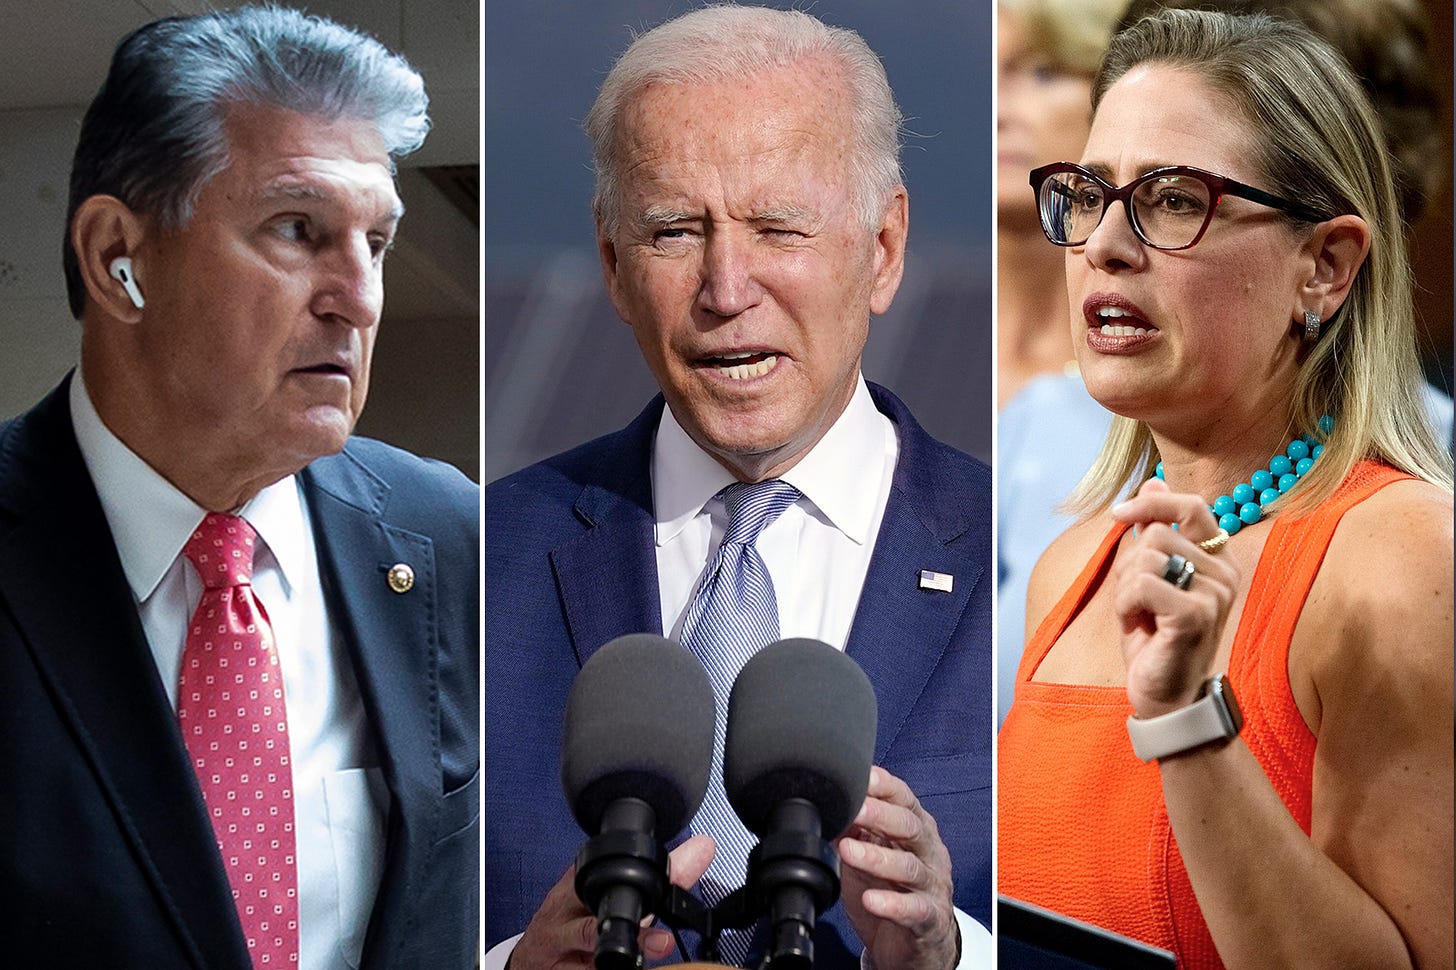 Biden meets with Sinema and Manchin about fate of $3.5T social spending bill